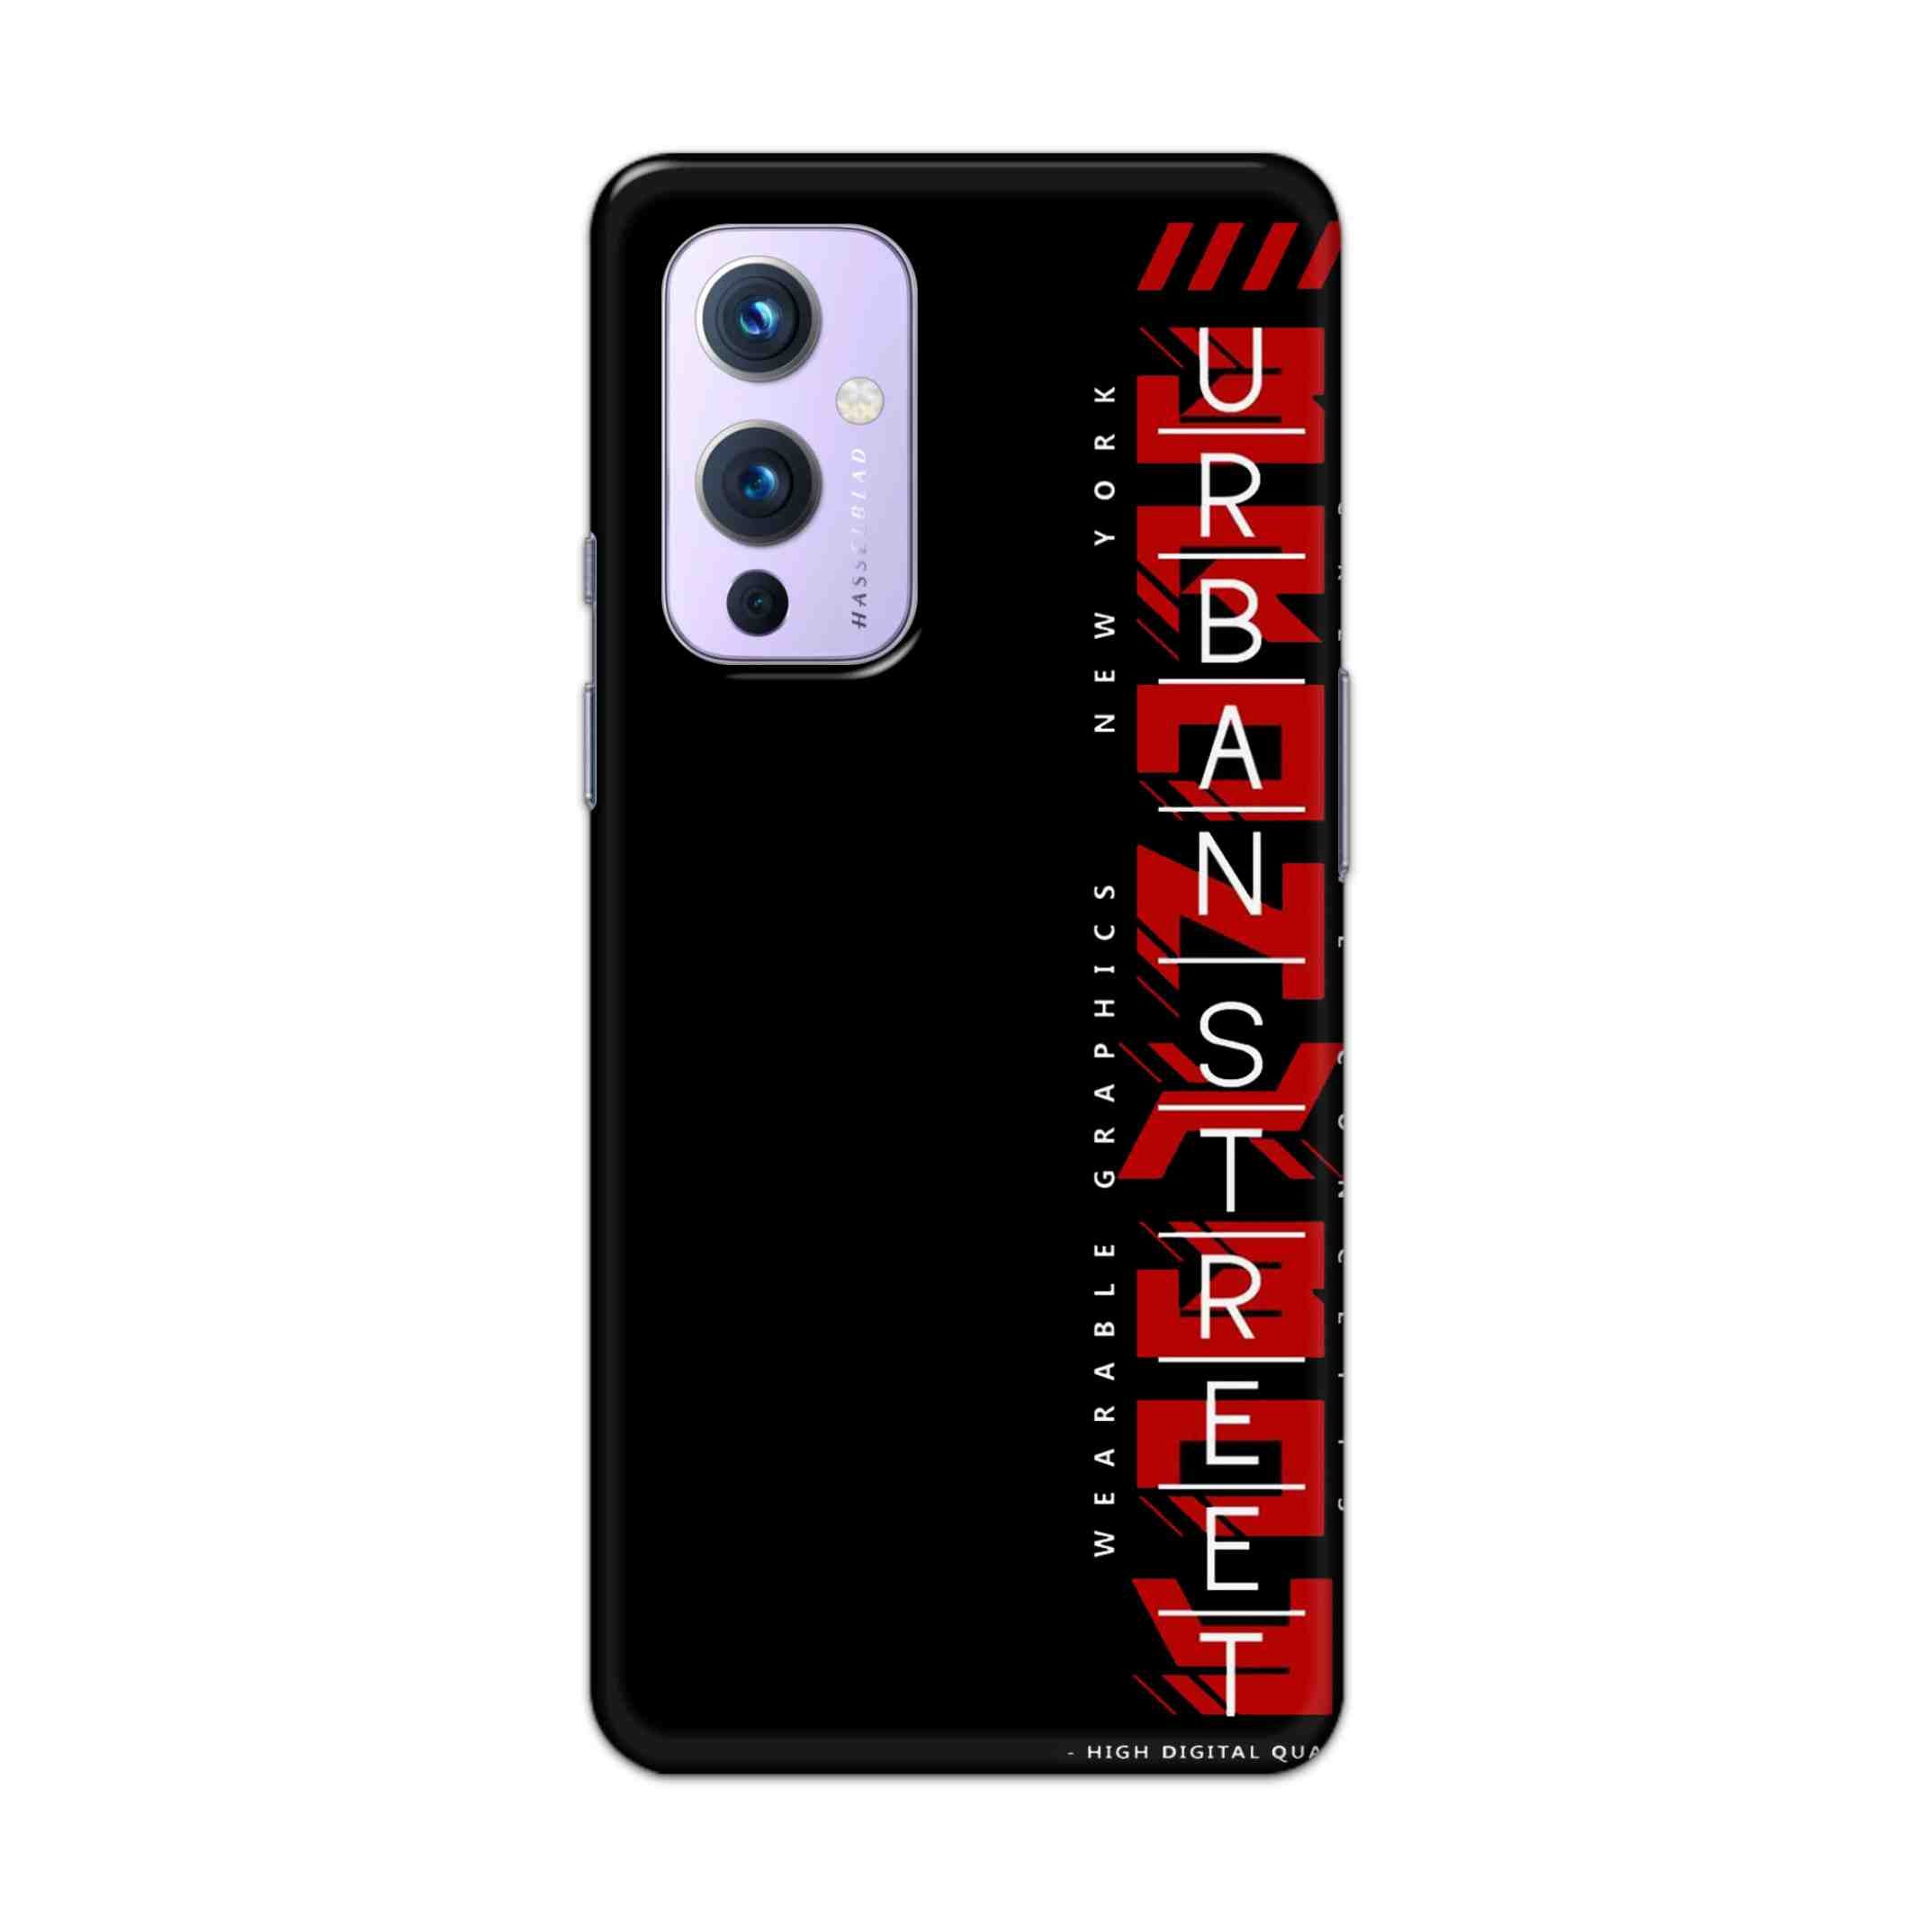 Buy Urban Street Hard Back Mobile Phone Case Cover For OnePlus 9 Online